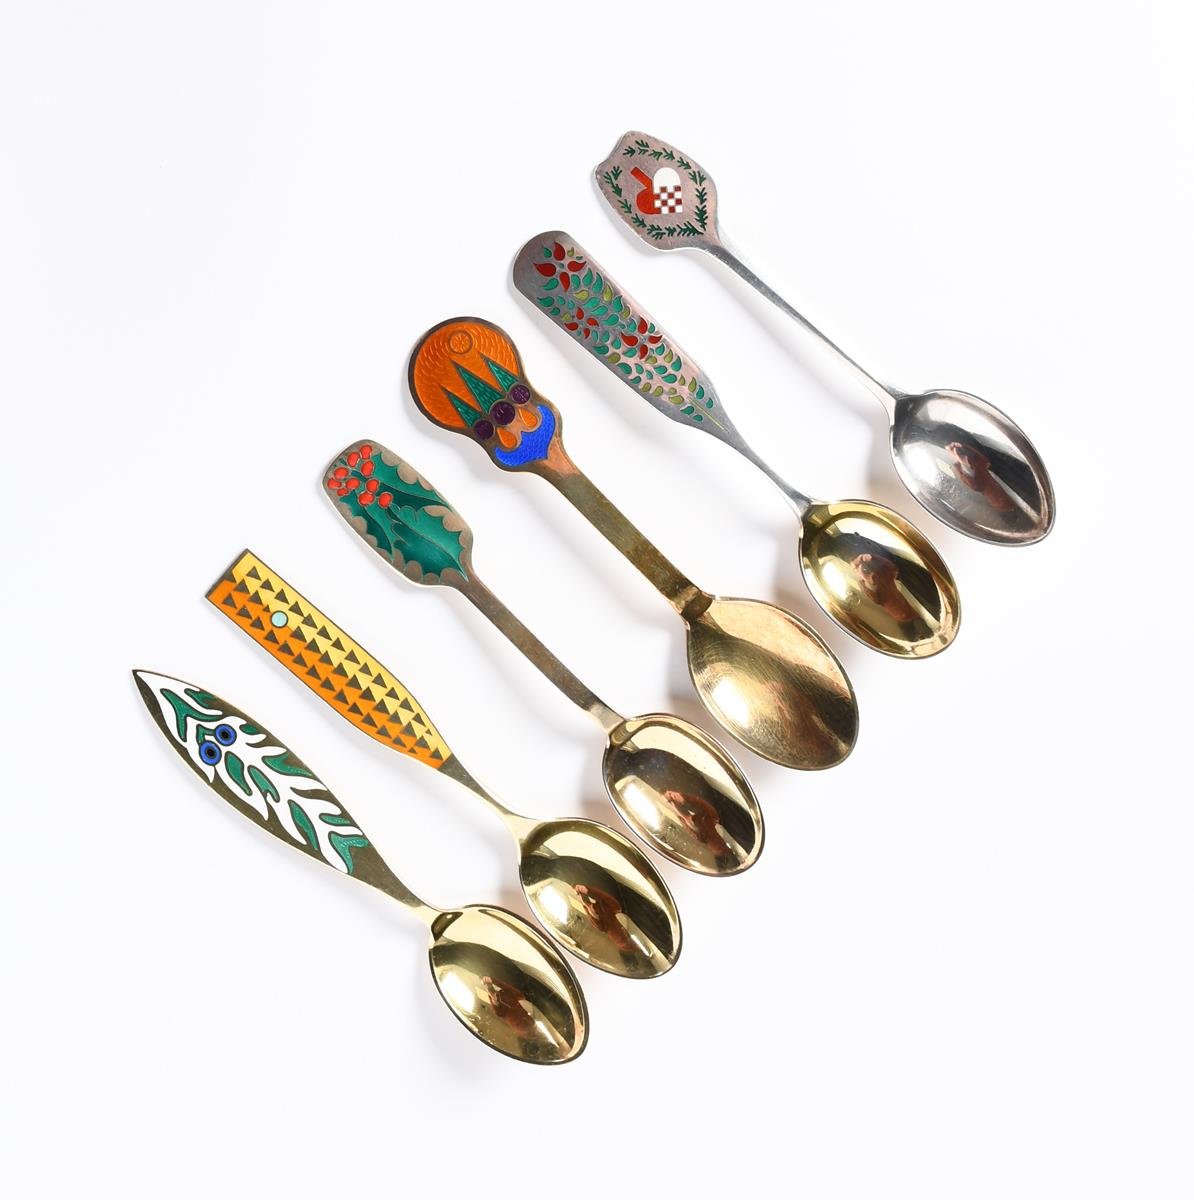 'Colorful Christmas' an A Michelsen silver and enamel Christmas 1951 spoon designed by Eigel Jensen,